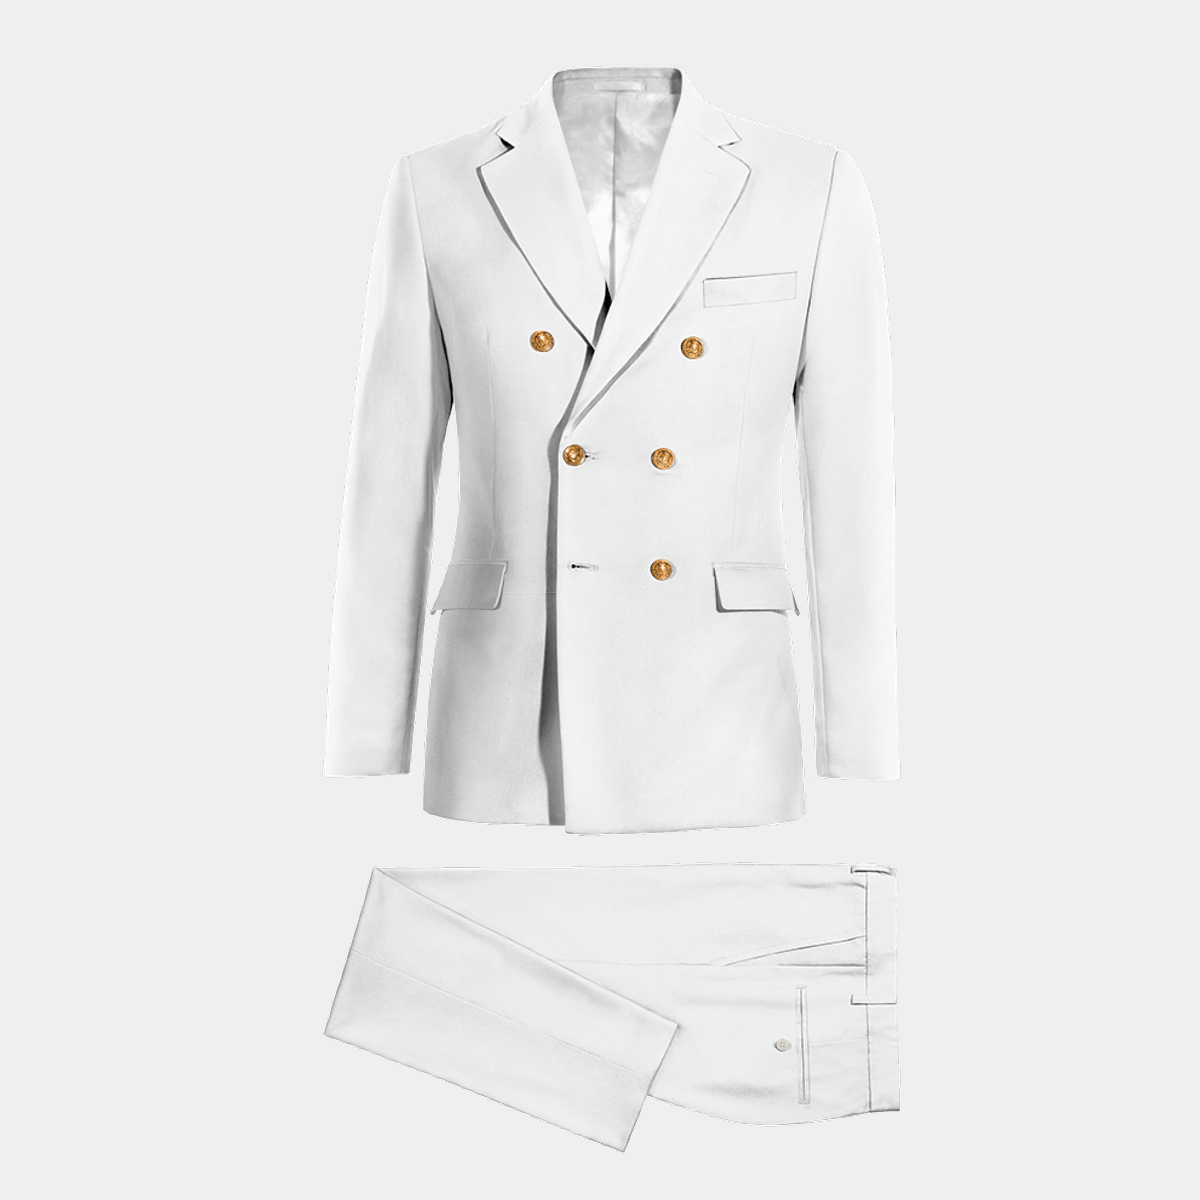 White linen 6 buttons double-breasted wide lapel Suit $277 | Hockerty